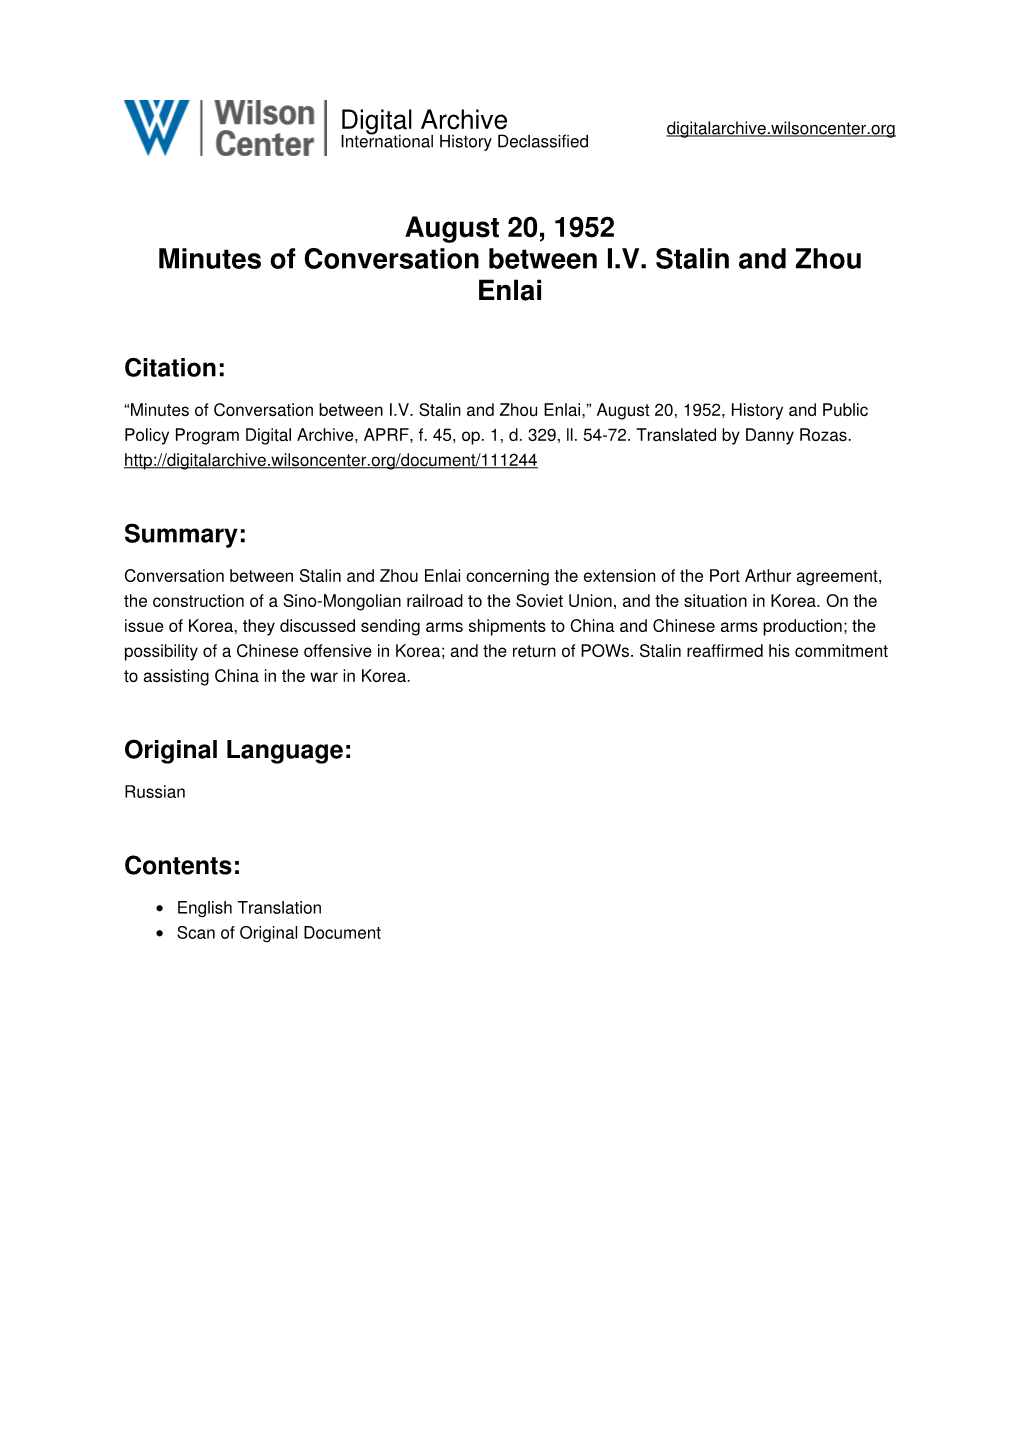 August 20, 1952 Minutes of Conversation Between I.V. Stalin and Zhou Enlai